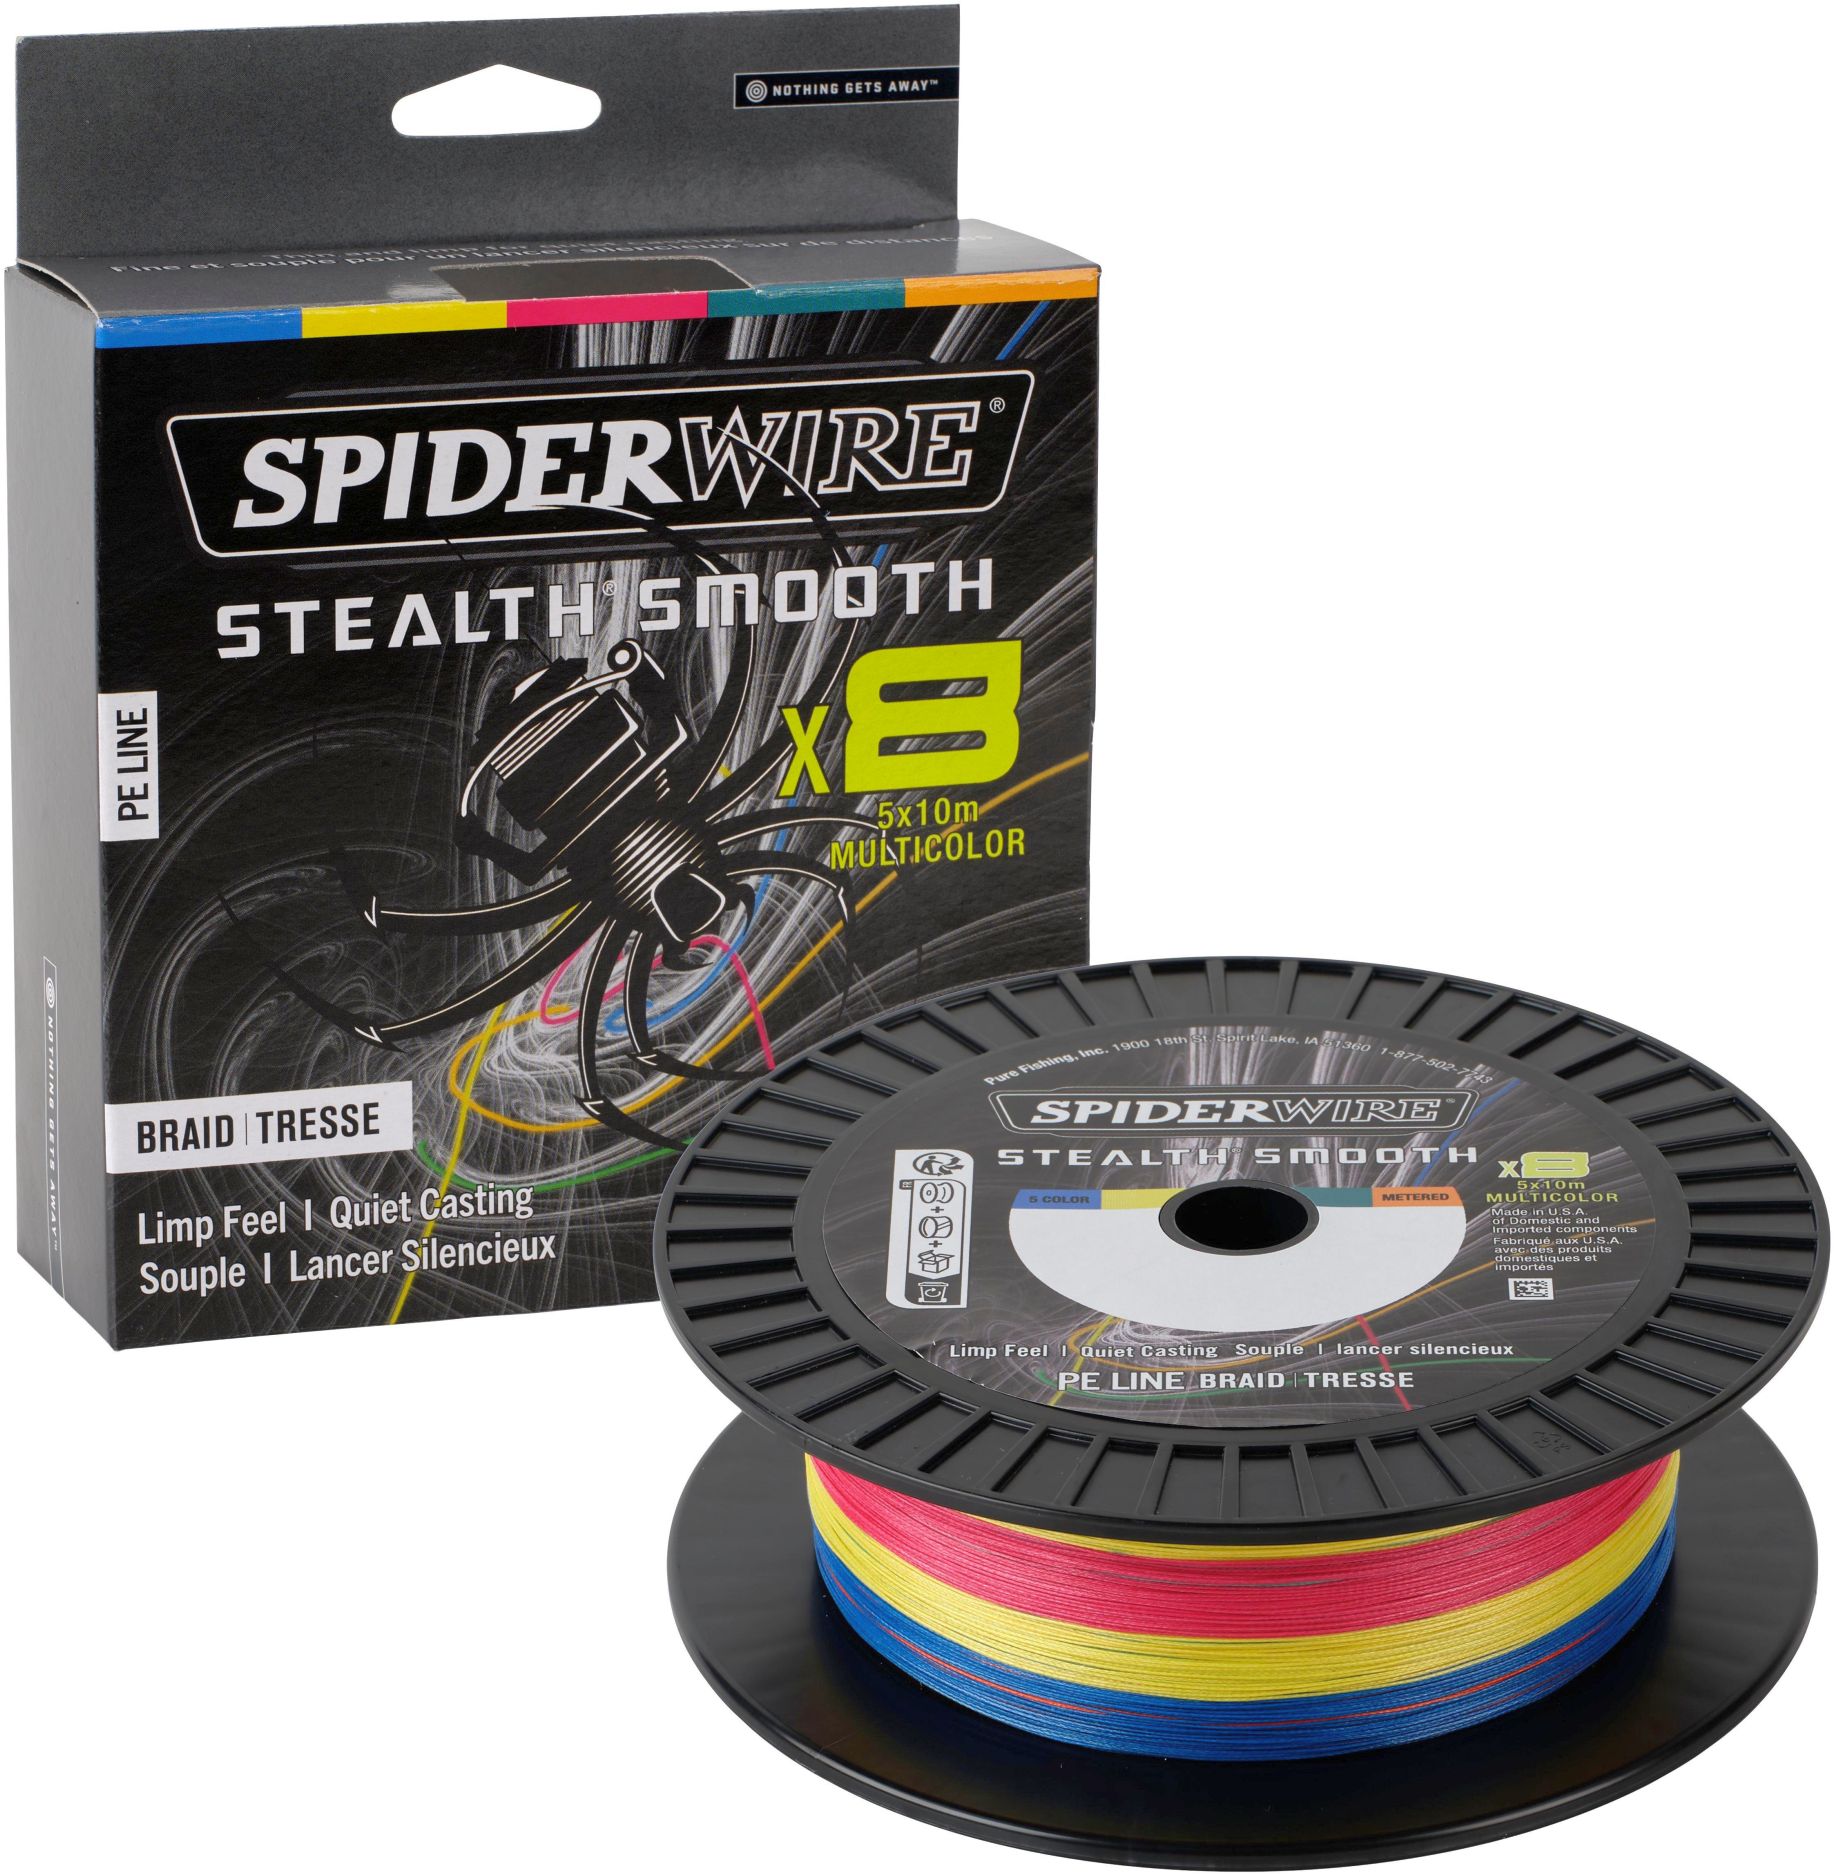 SPIDERWIRE Stealth Smooth 8 Multicolor 6000 m 0,39 mm 46,3 kg